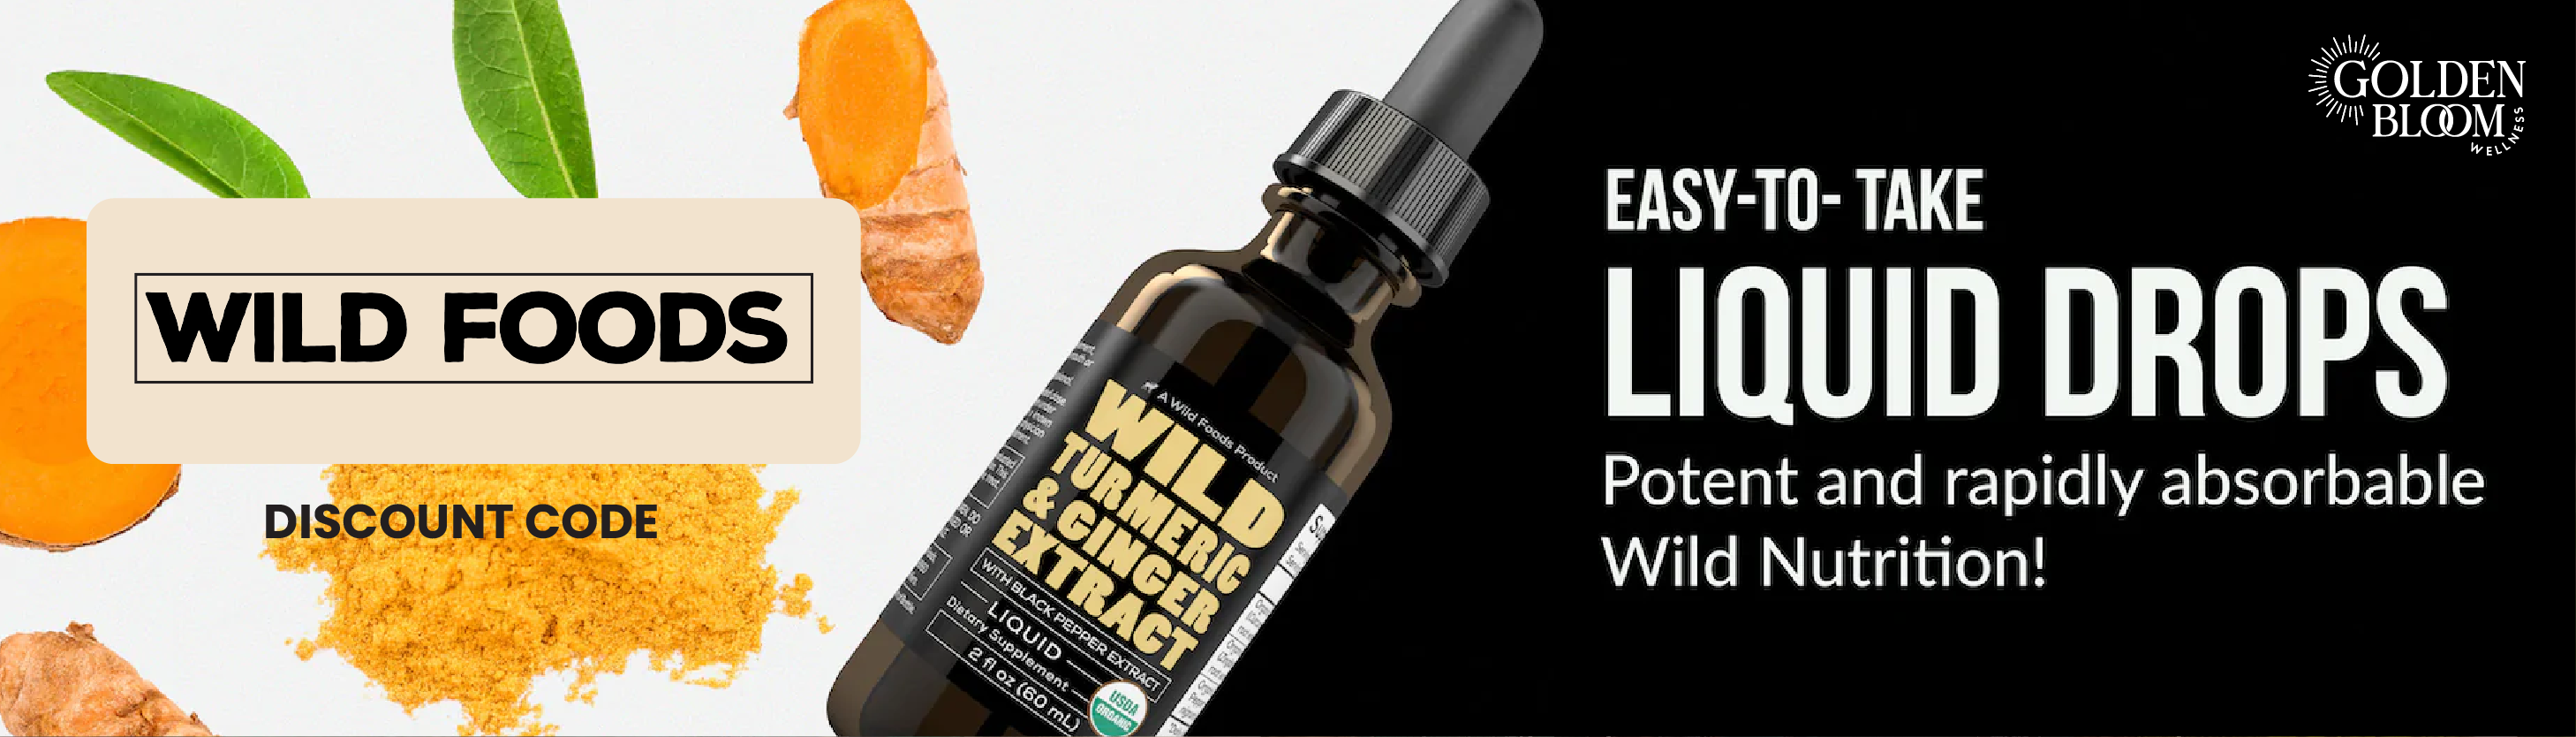 Wild Foods Co Featured Image Banner